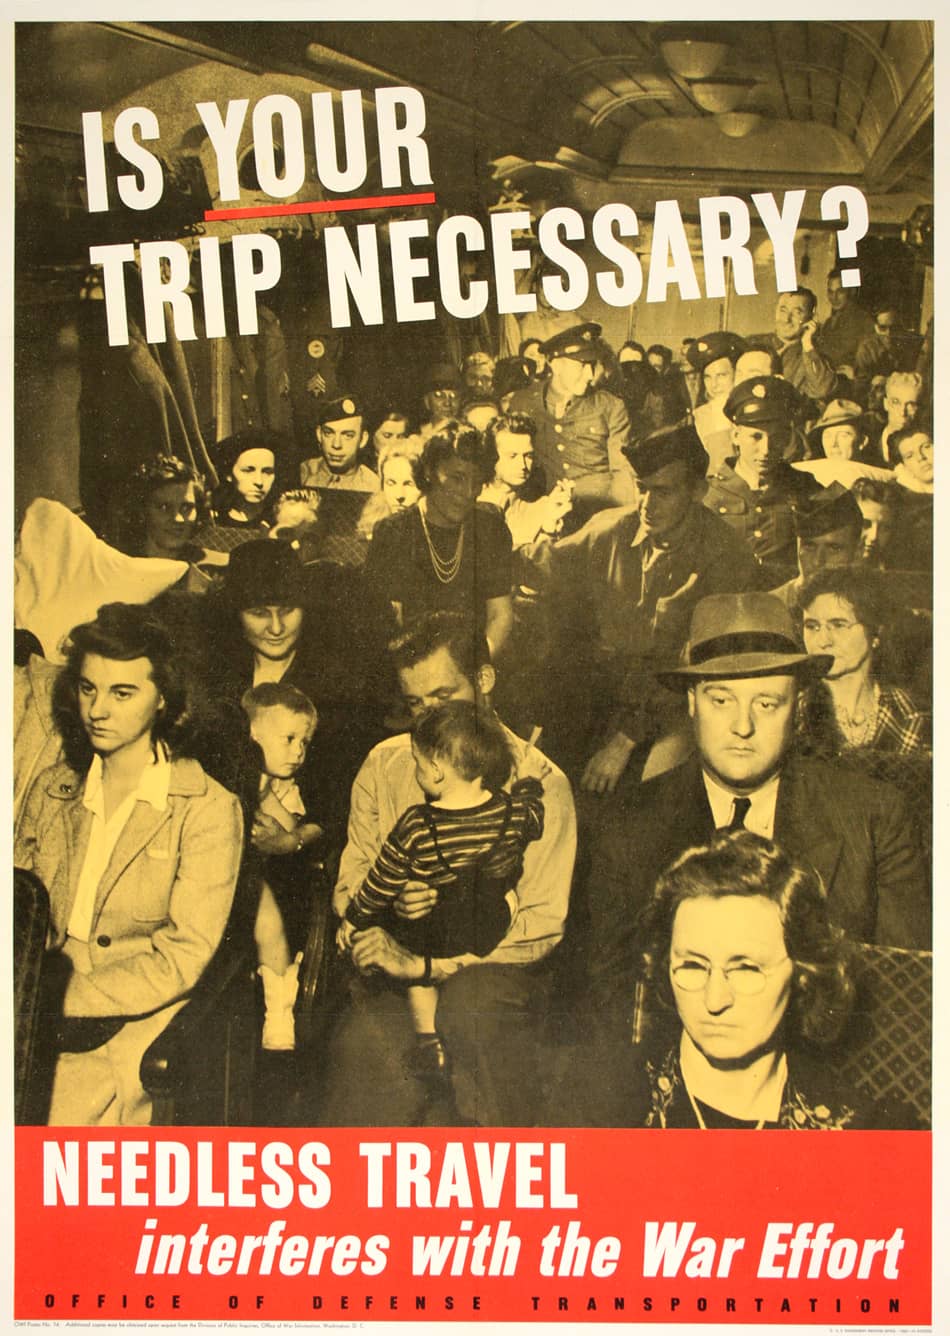 Original Vintage WW II Poster - Is Your Trip Necessary? Needless Travel